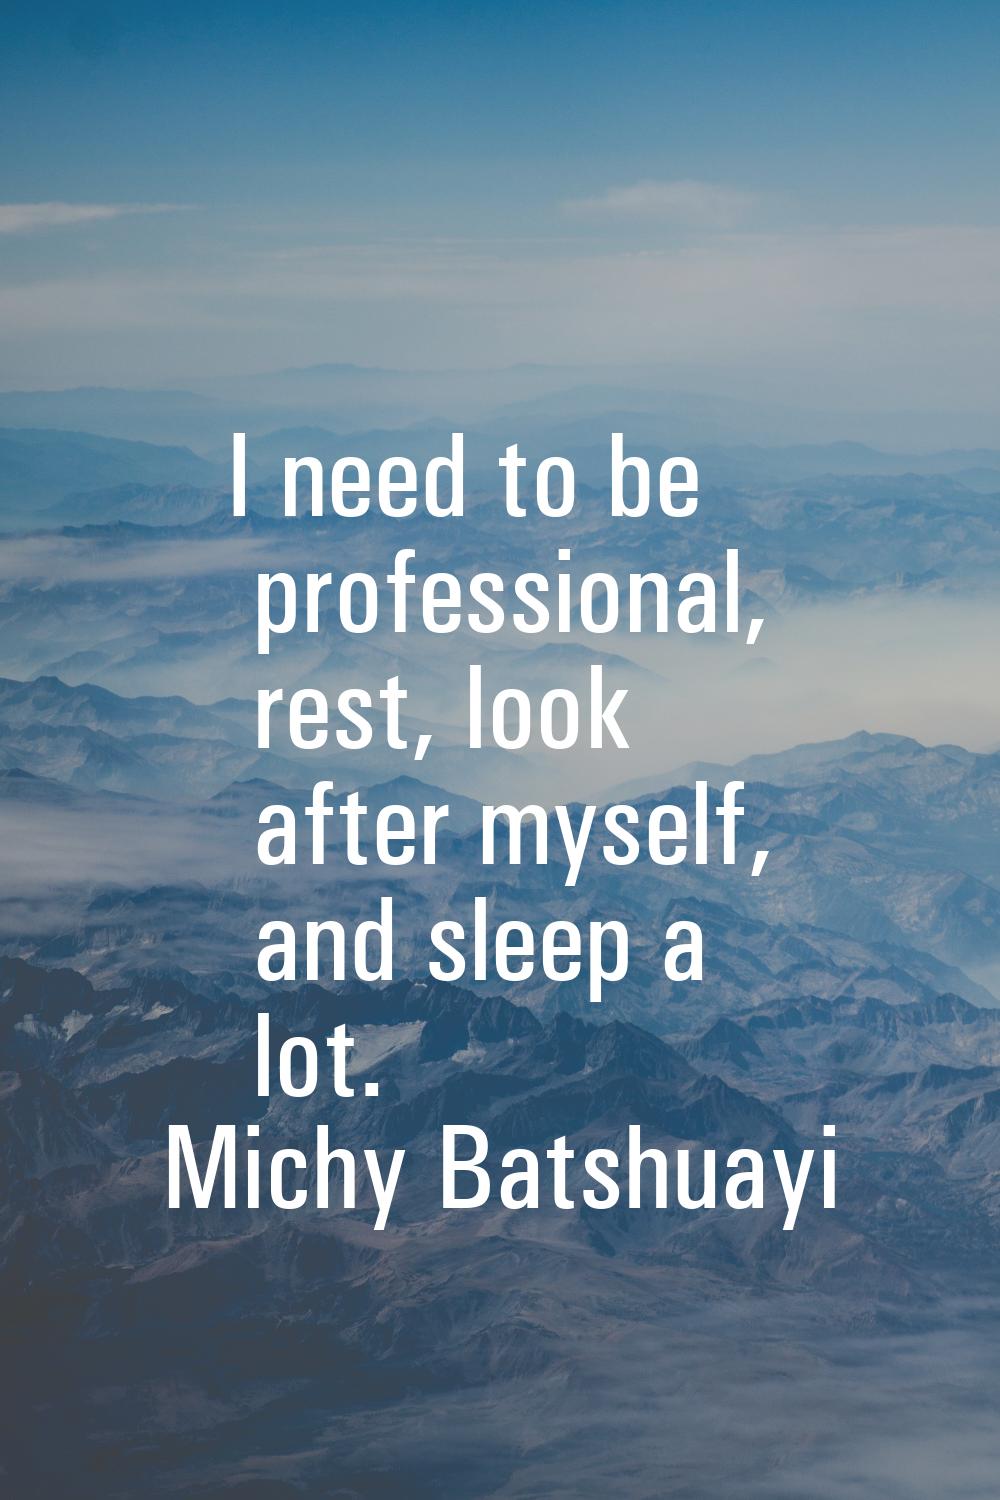 I need to be professional, rest, look after myself, and sleep a lot.